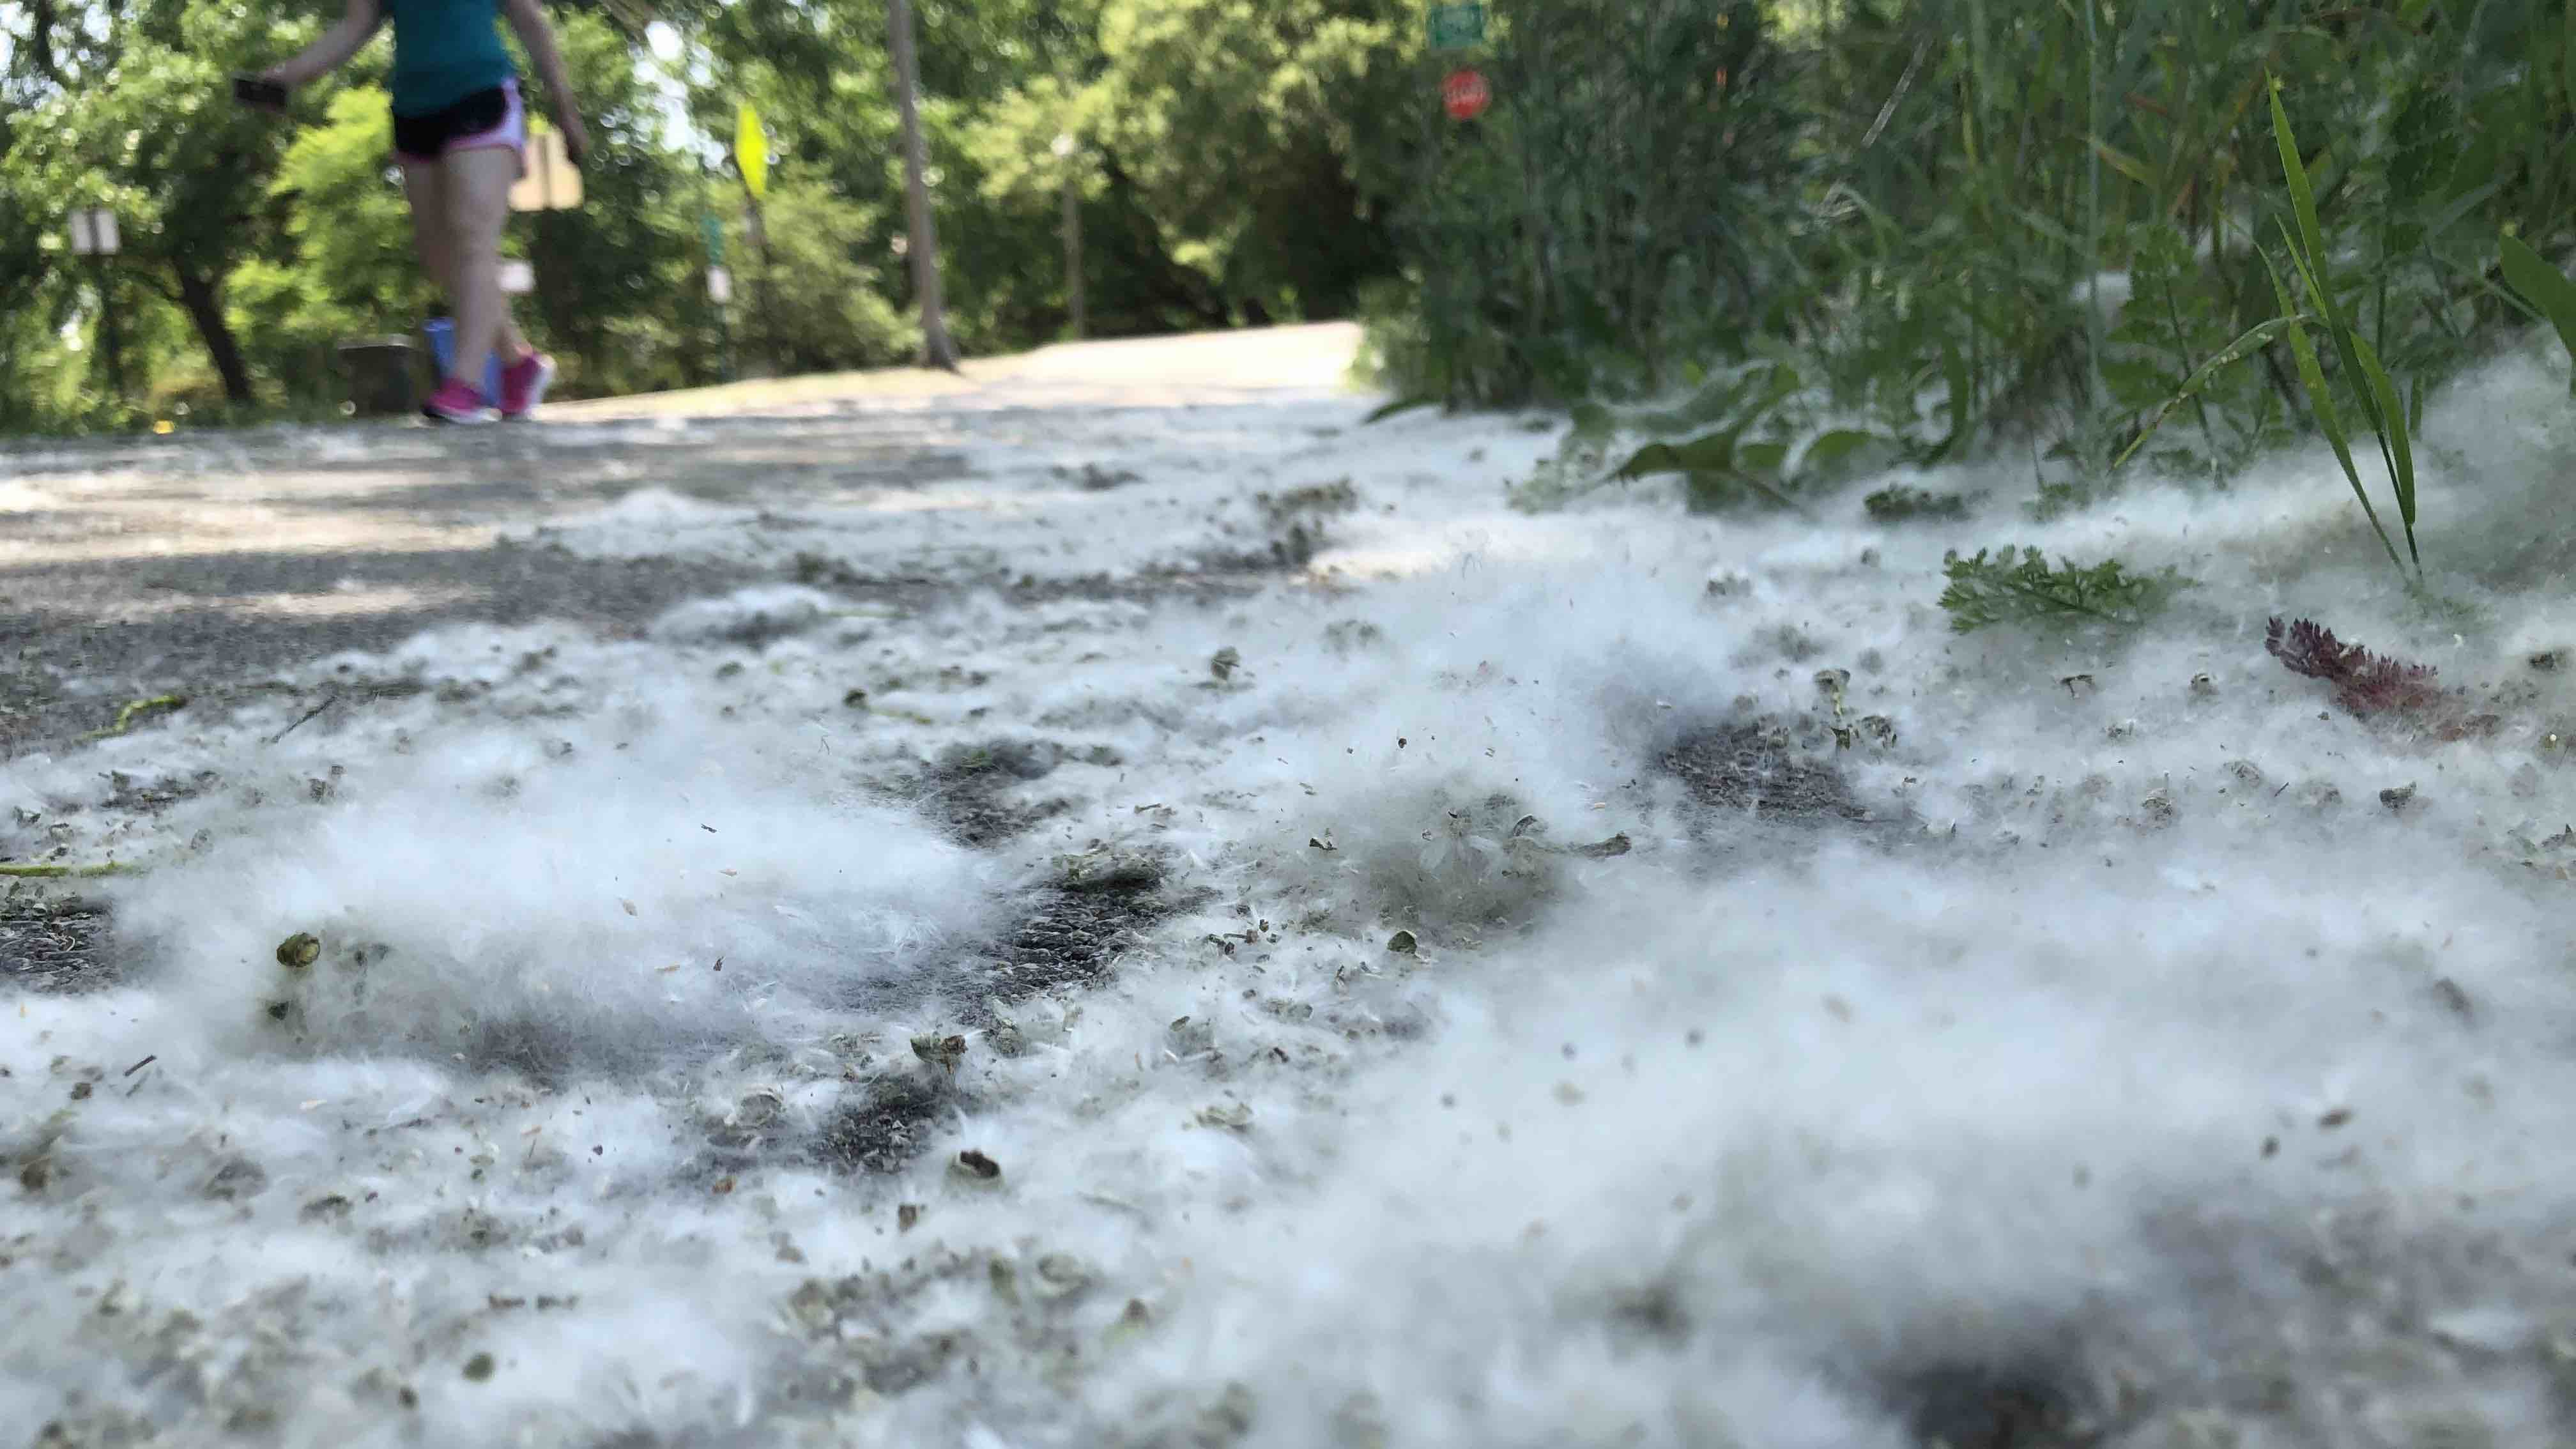 What's that fluff? Cottonwood pollination season will end soon